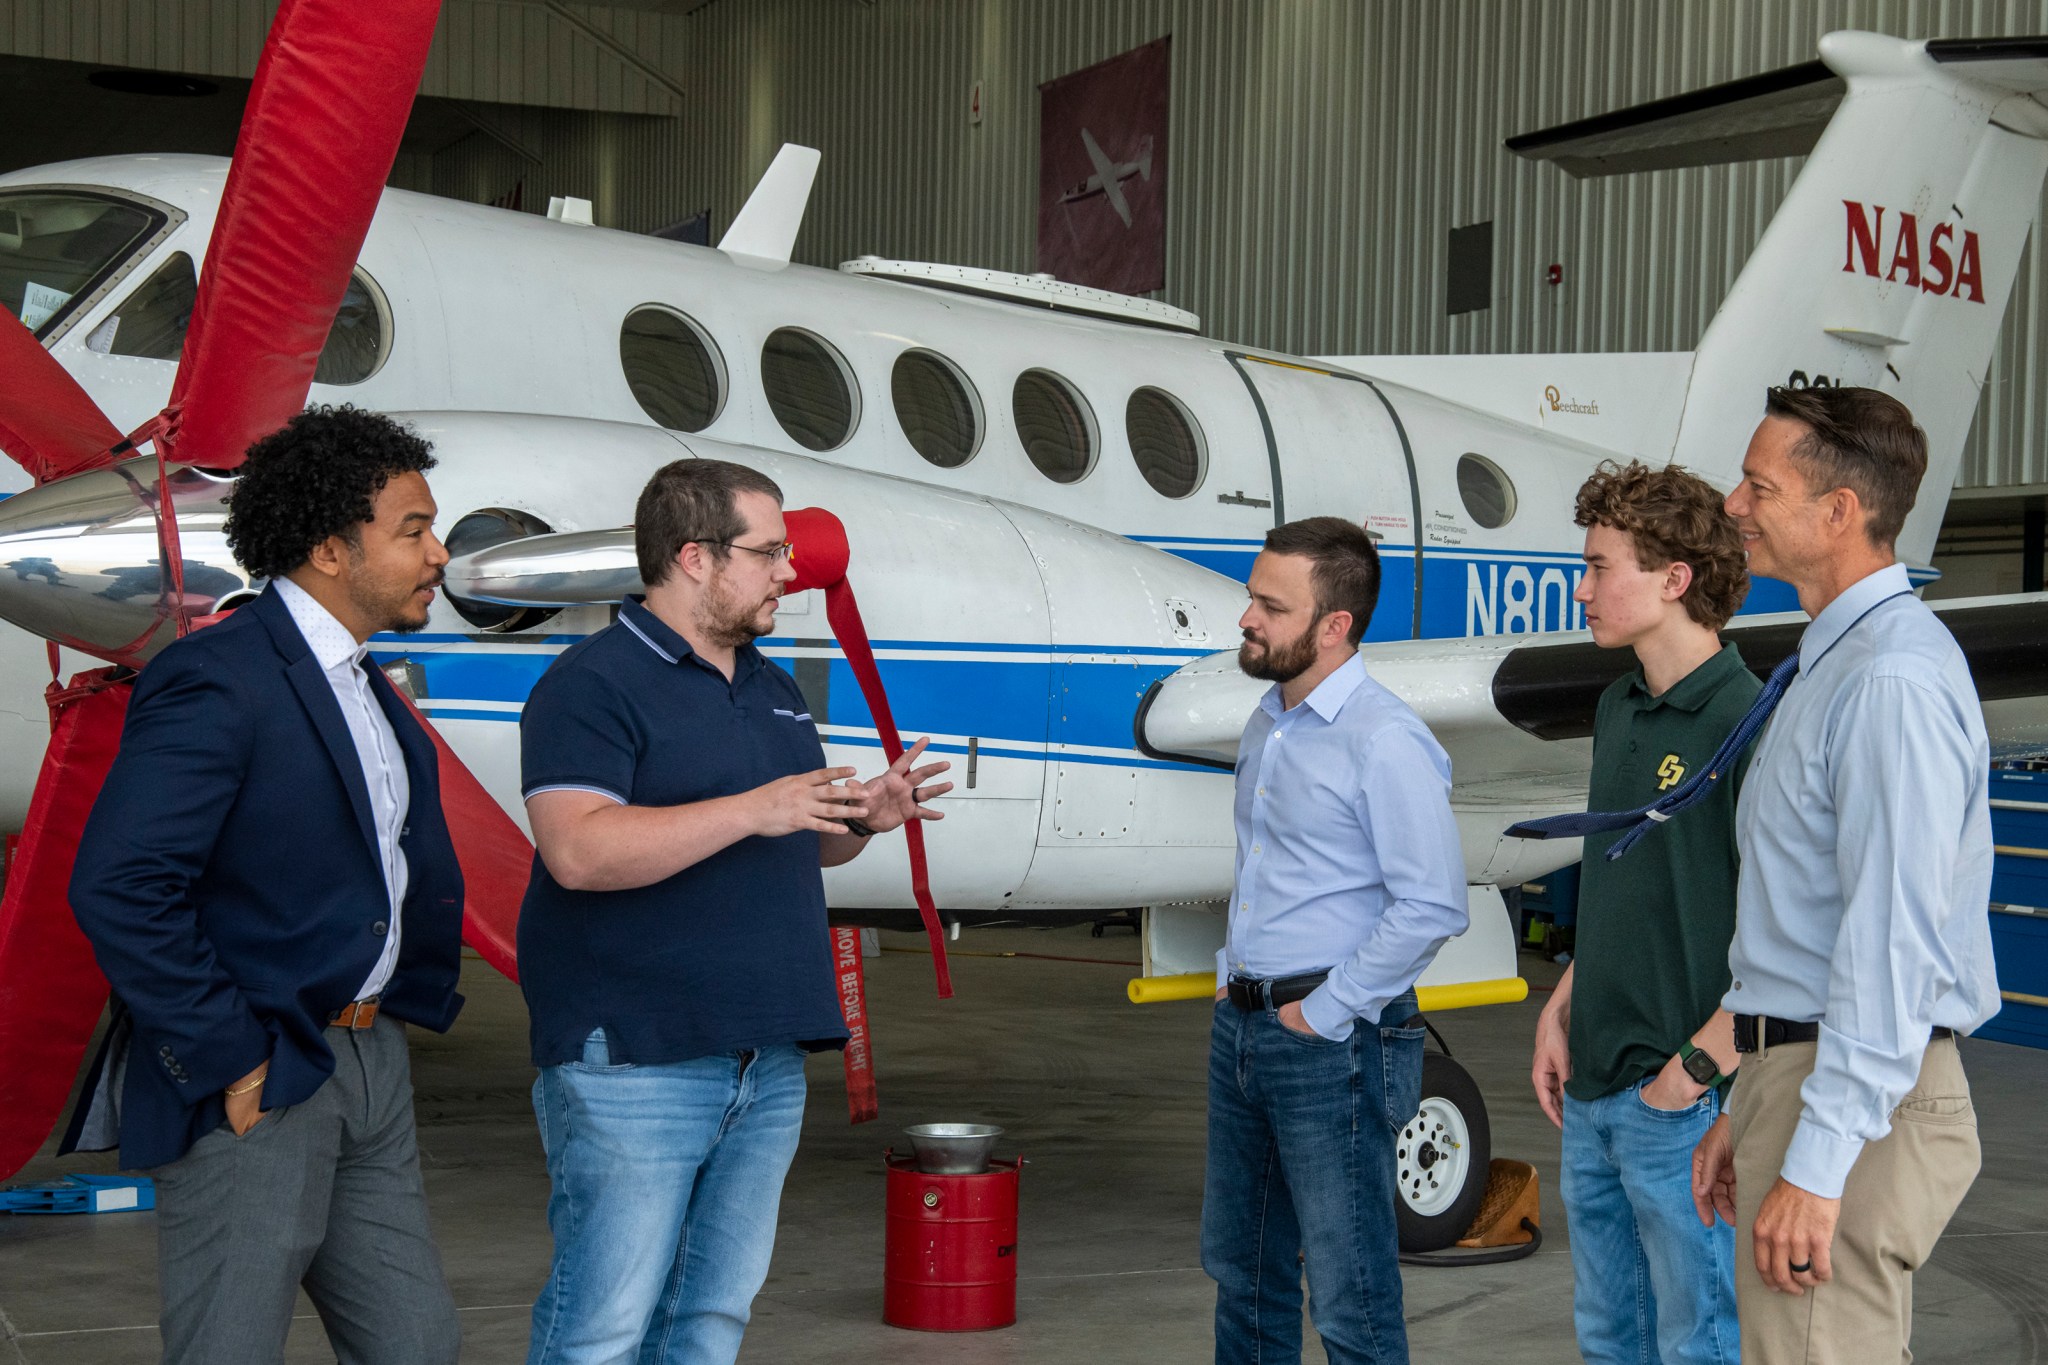 Matthew Walderson, second left, is principal investigator for a wireless hub designed to more easily update aircraft electronics. Pictured (L to R) are Terrence Garry, Brian Boogaad, NASA intern Jack Young, and Technology Transfer Officer Ben Tomlinson.